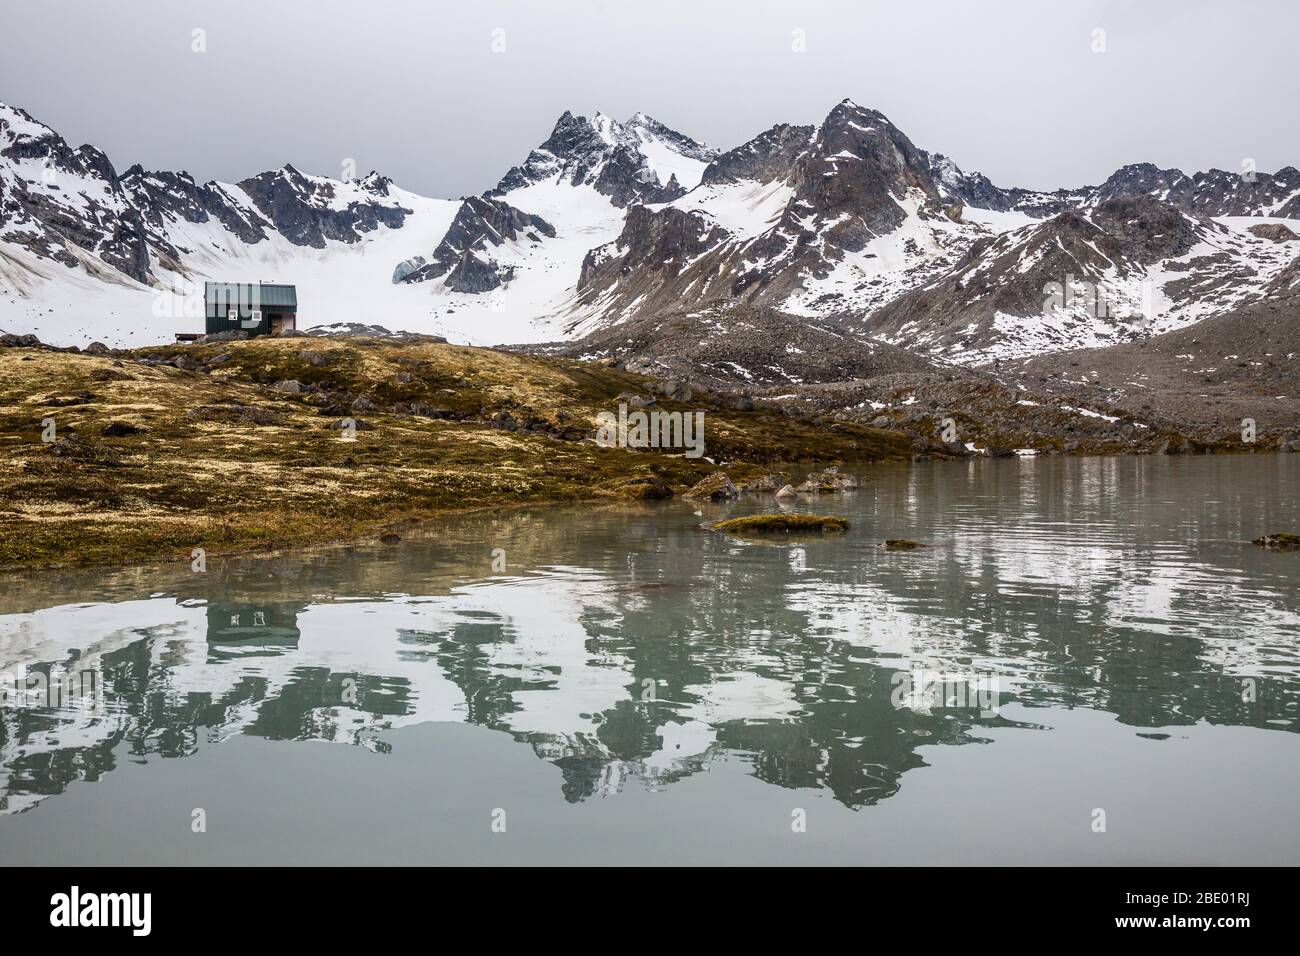 Small green backcountry hut in remote Alaska, reflected in a calm alpine lake in the Talkeetna Mountains. Stock Photo